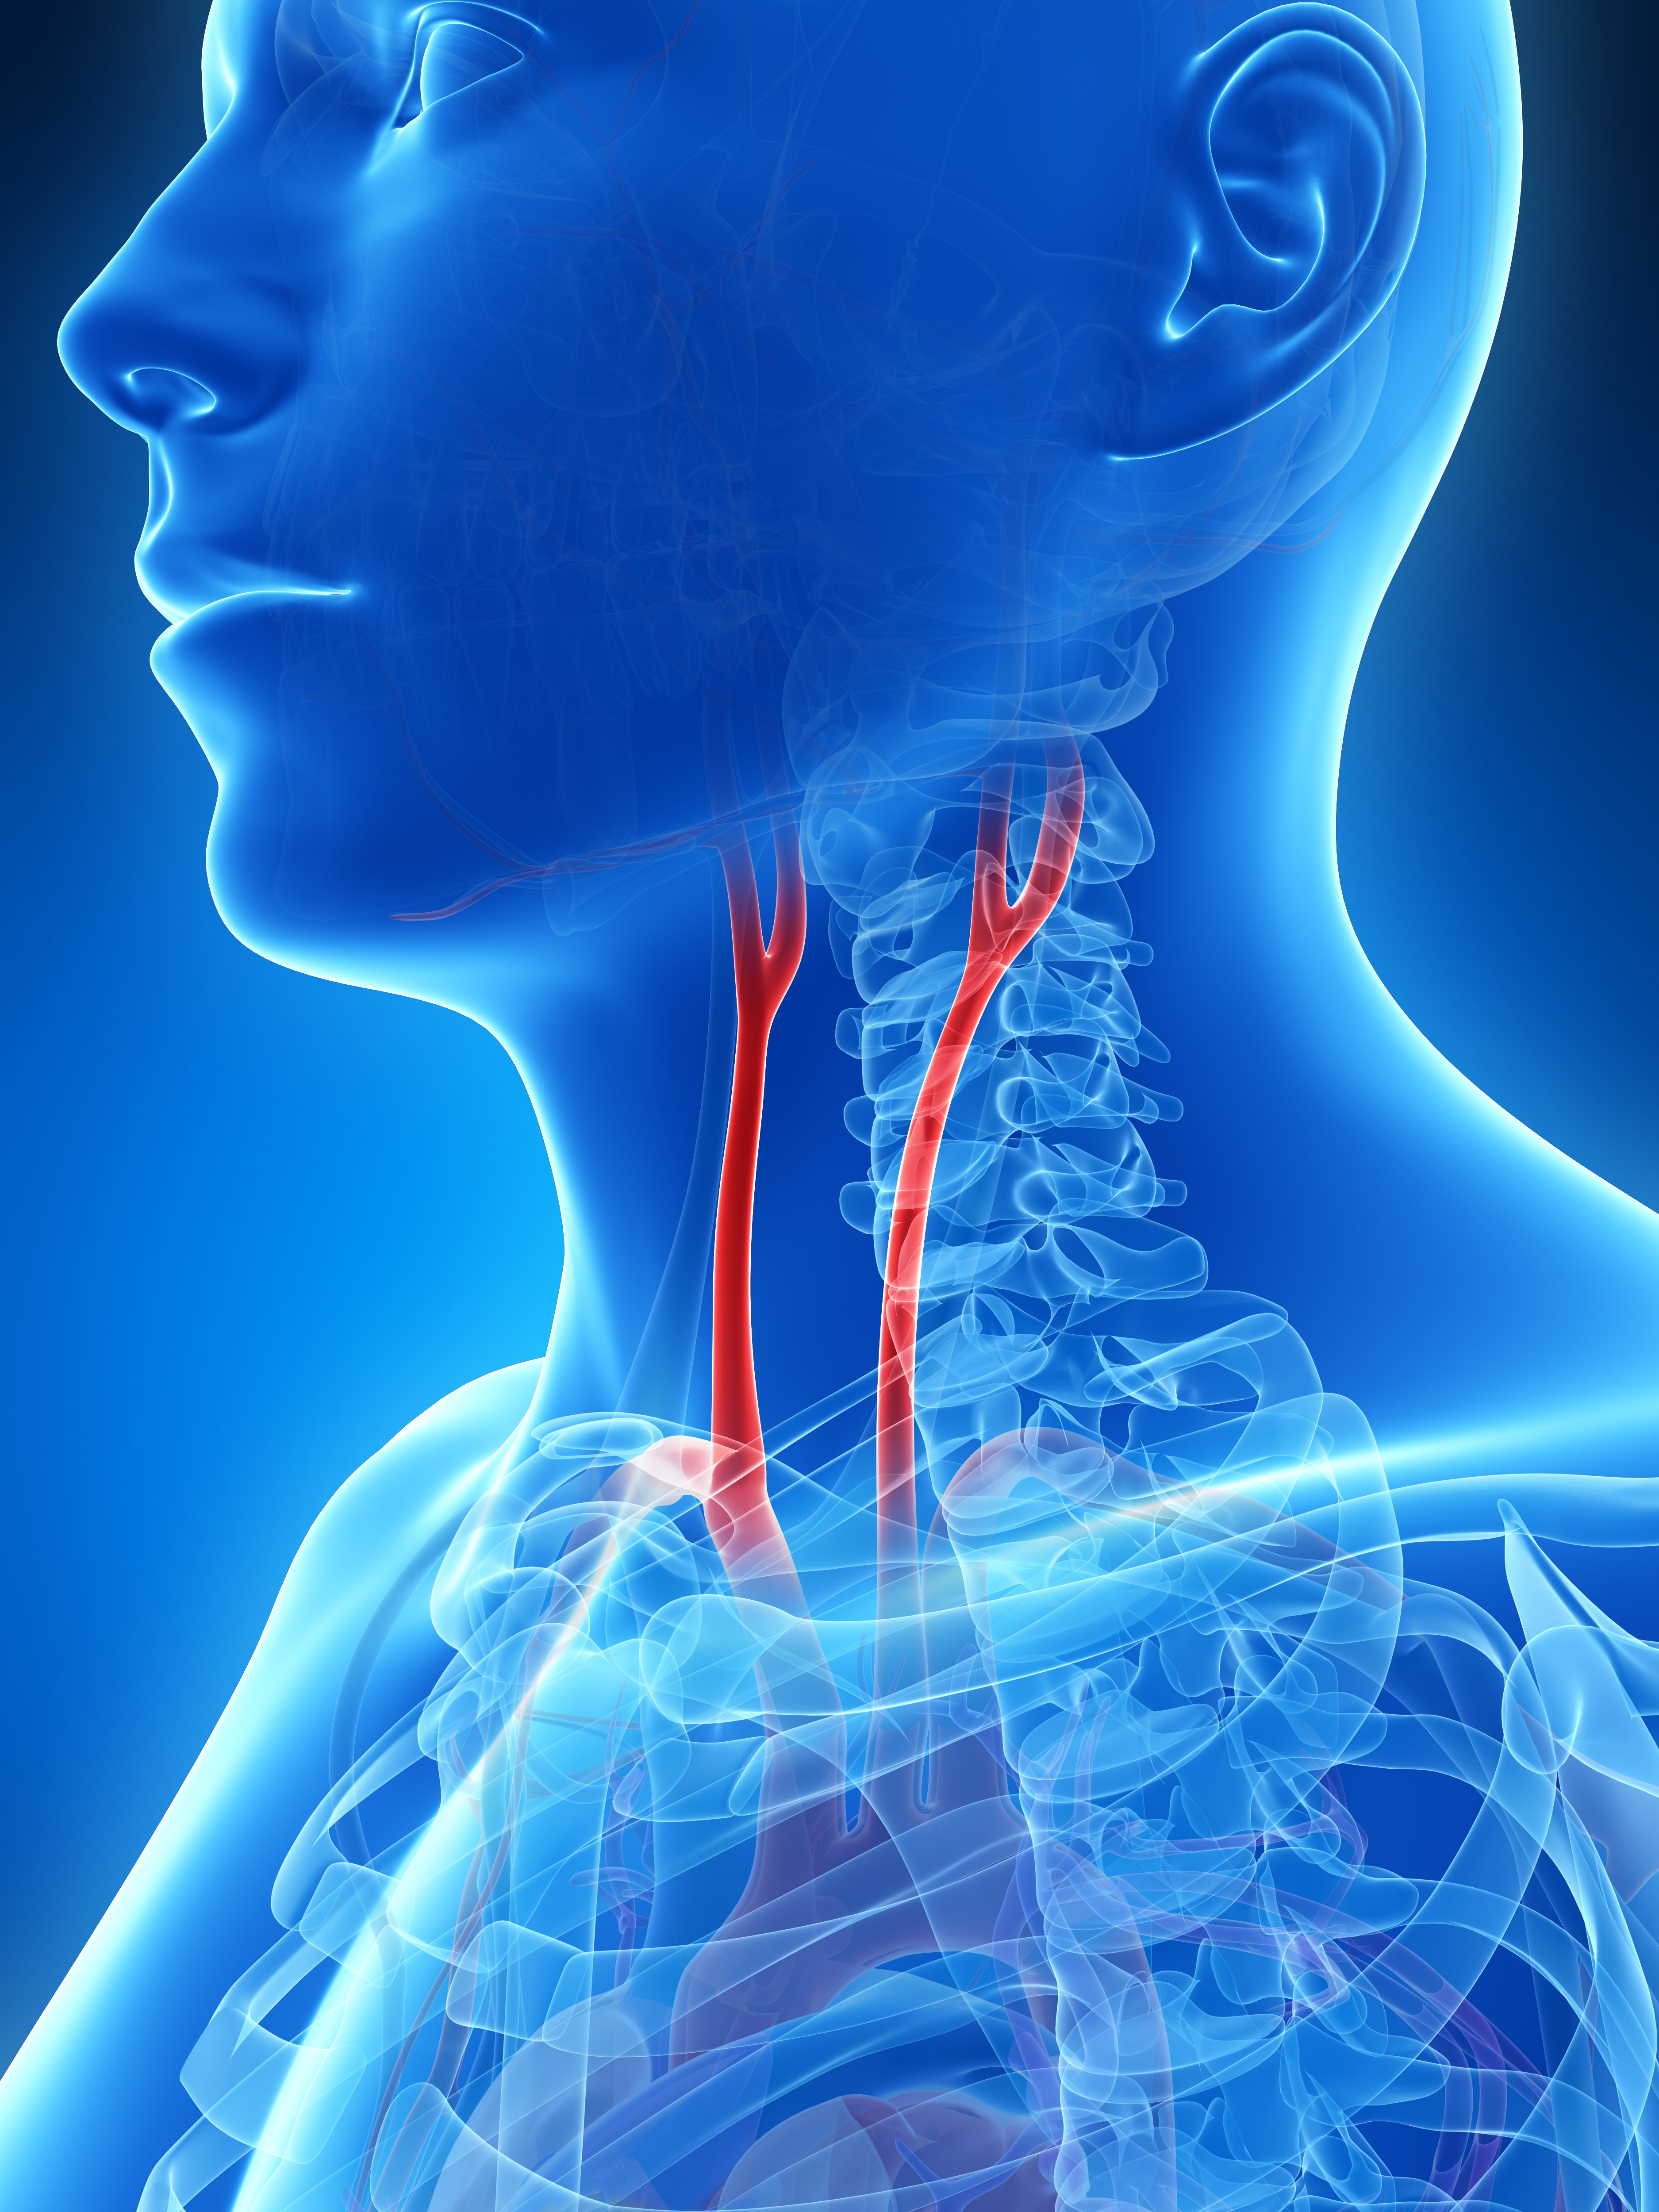 Medical illustration showing the carotid arteries running up the neck